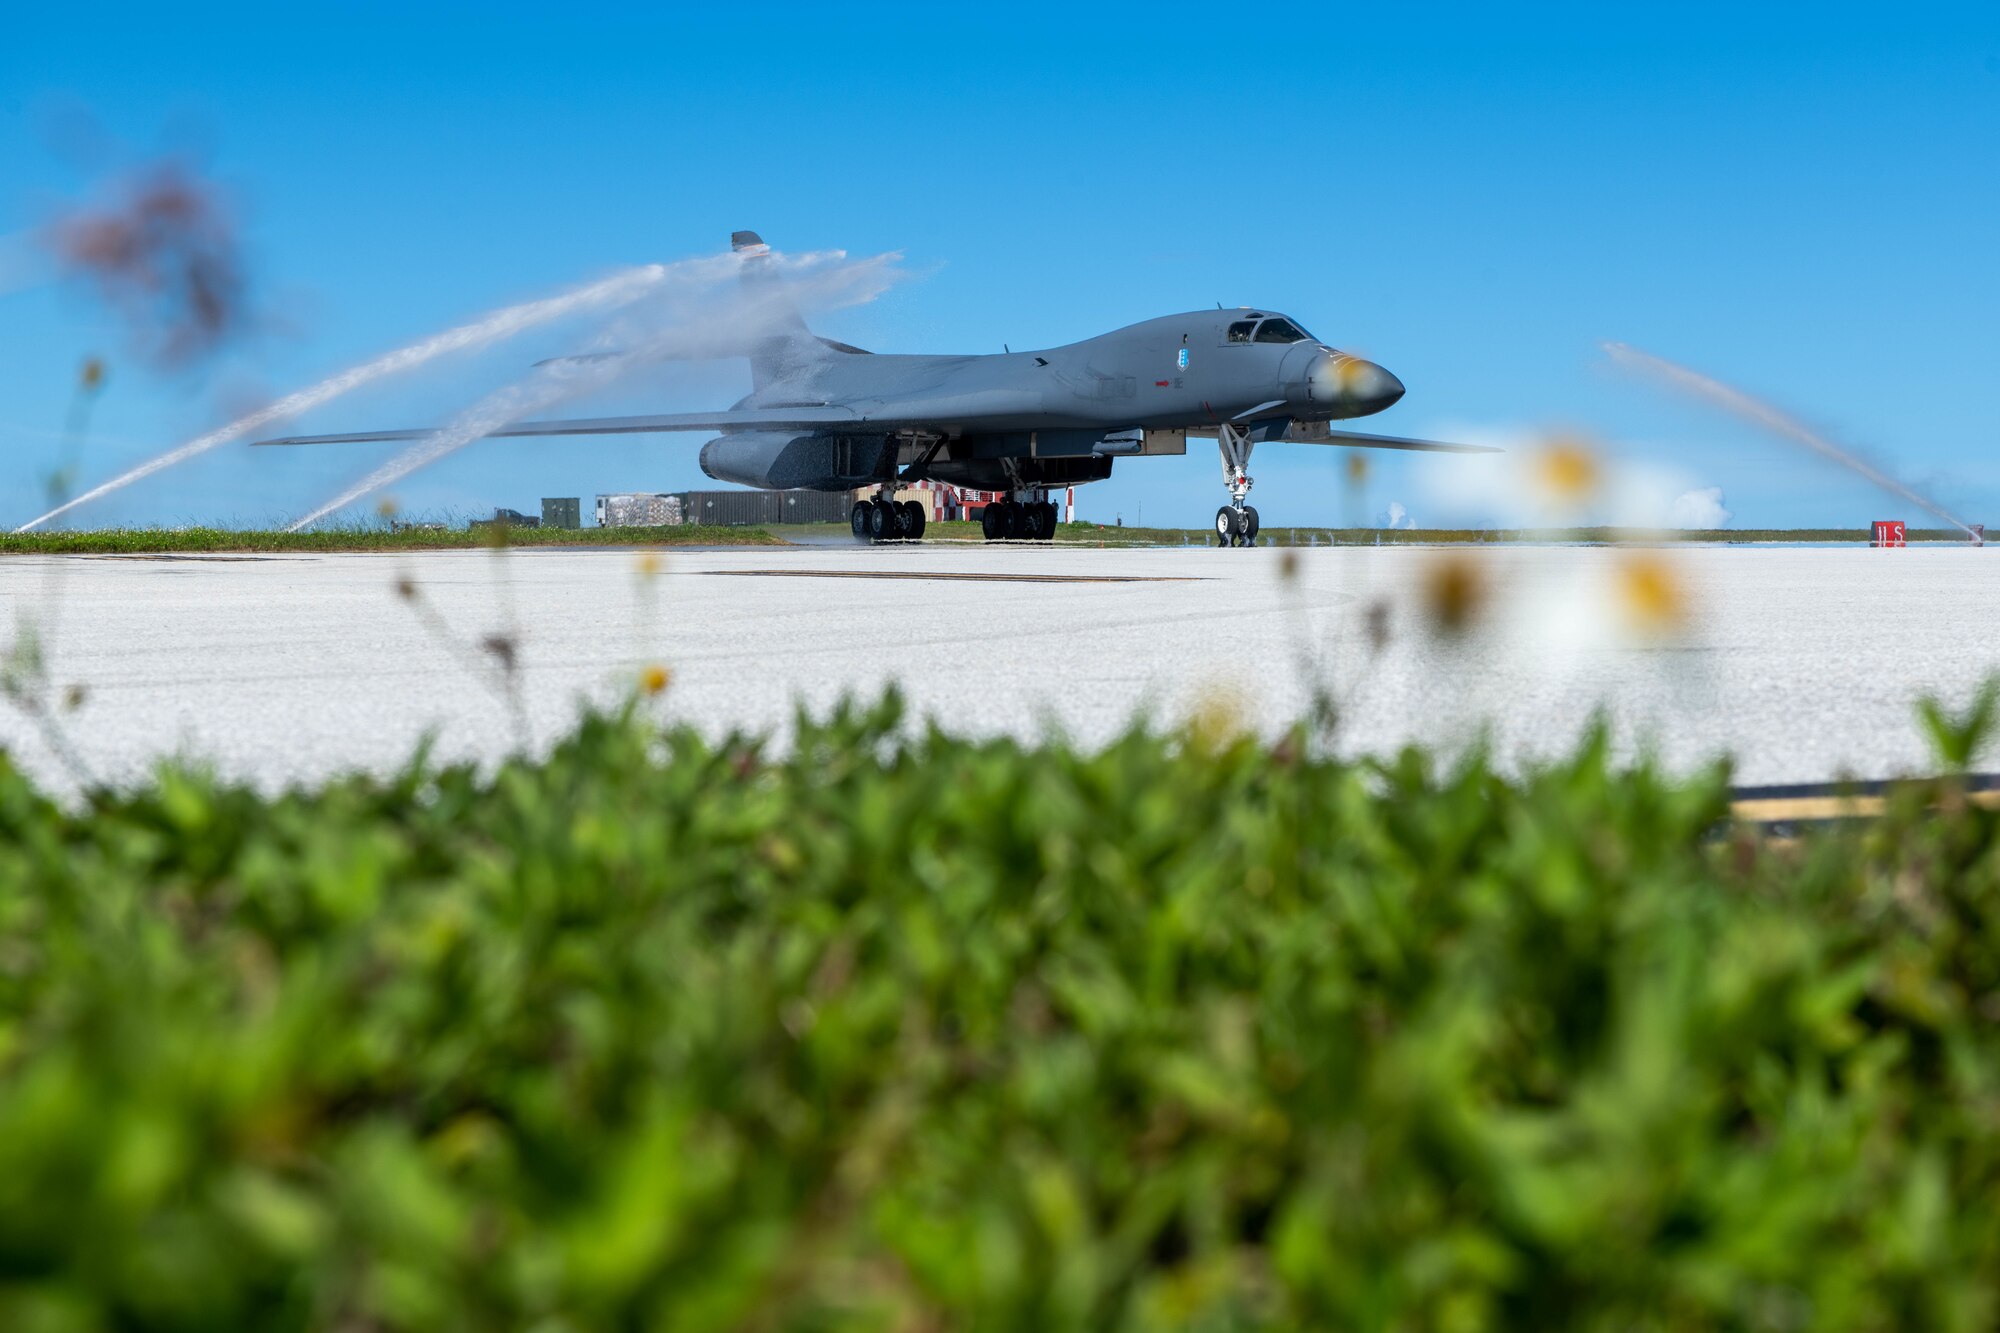 A U.S. Air Force B-1B Lancer, assigned to the 34th Bomb Squadron, Ellsworth Air Force Base, taxis through a clean water wash station at Andersen Air Force Base, Guam, after arriving for a Bomber Task Force mission June 2, 2022.